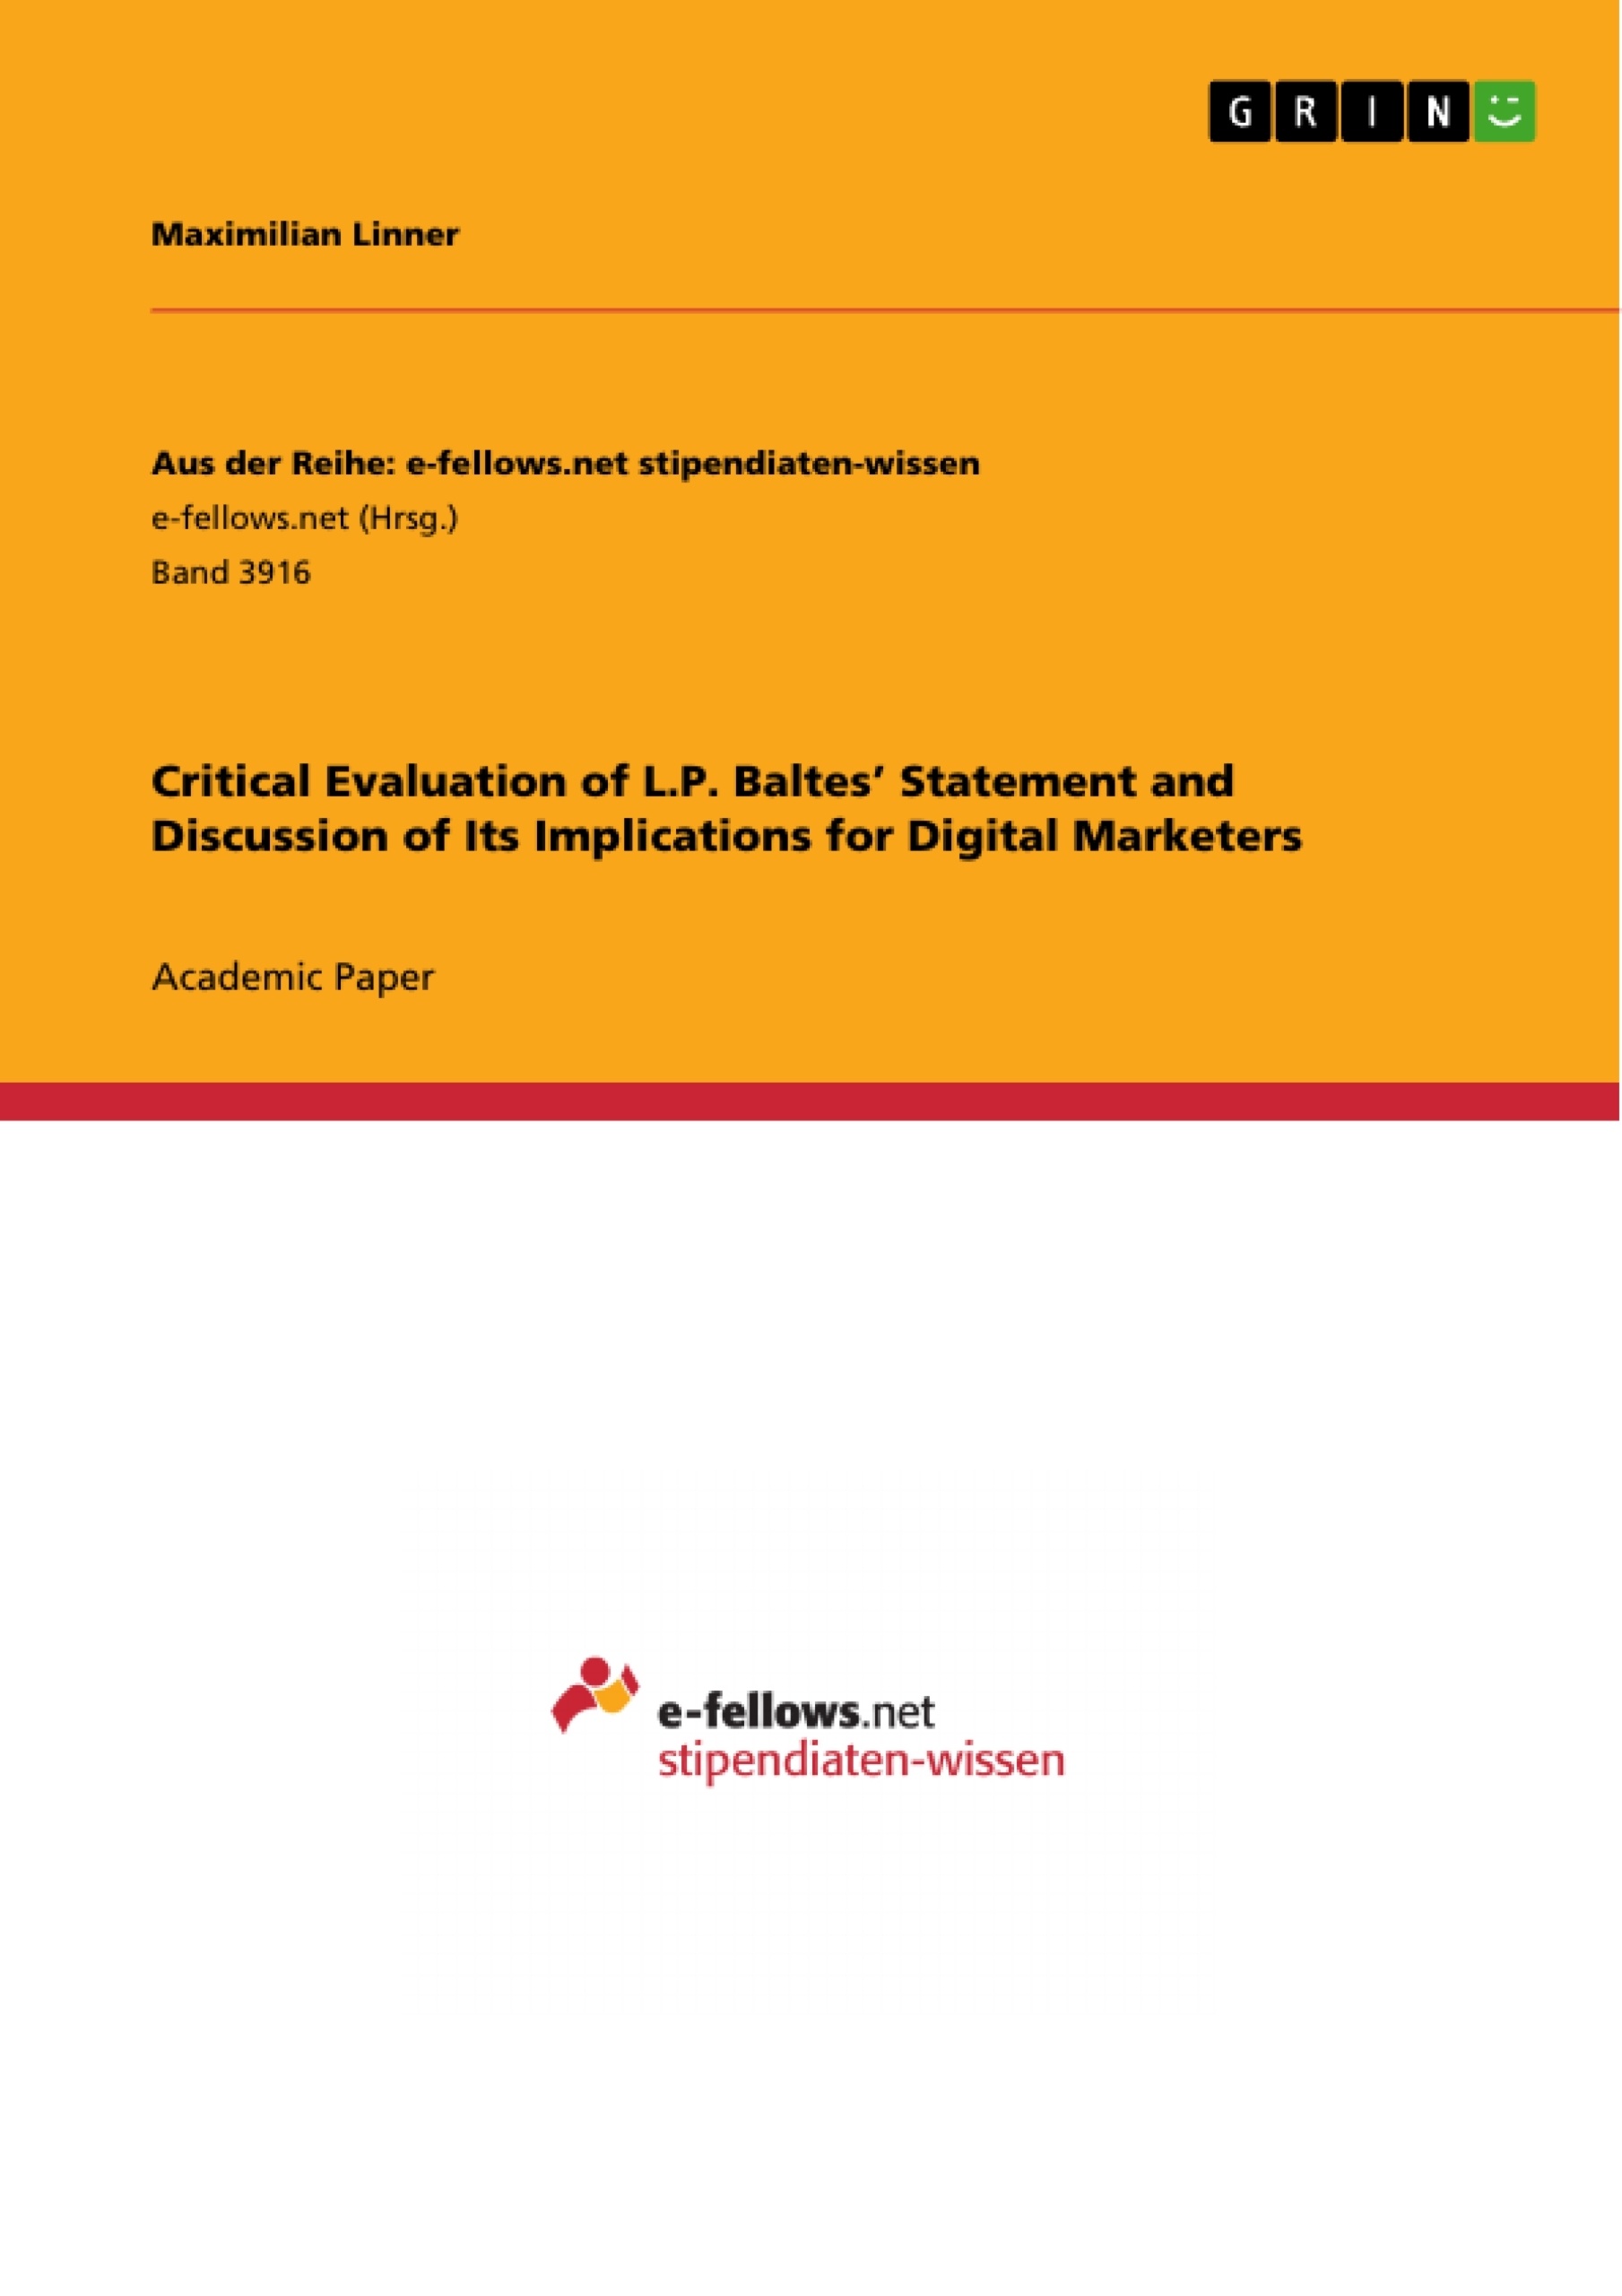 Title: Critical Evaluation of L.P. Baltes’ Statement and Discussion of Its Implications for Digital Marketers